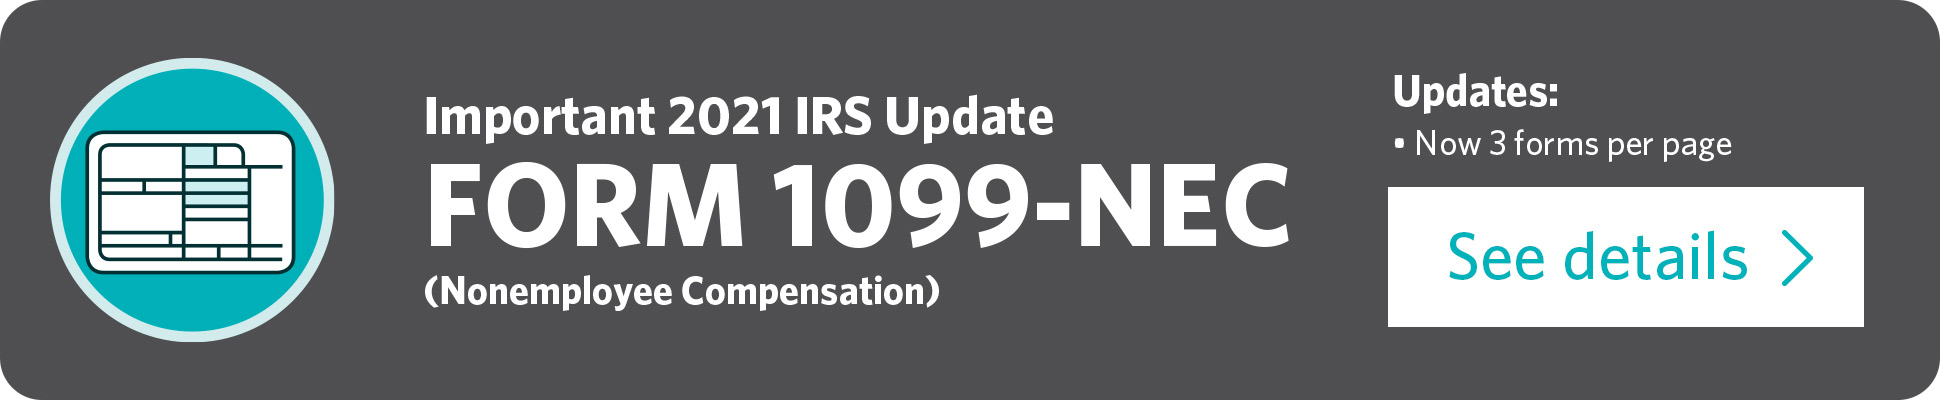 Important 2021 IRS Update: FORM 1099-NEC (Nonemployee Compensation). Click here for details.